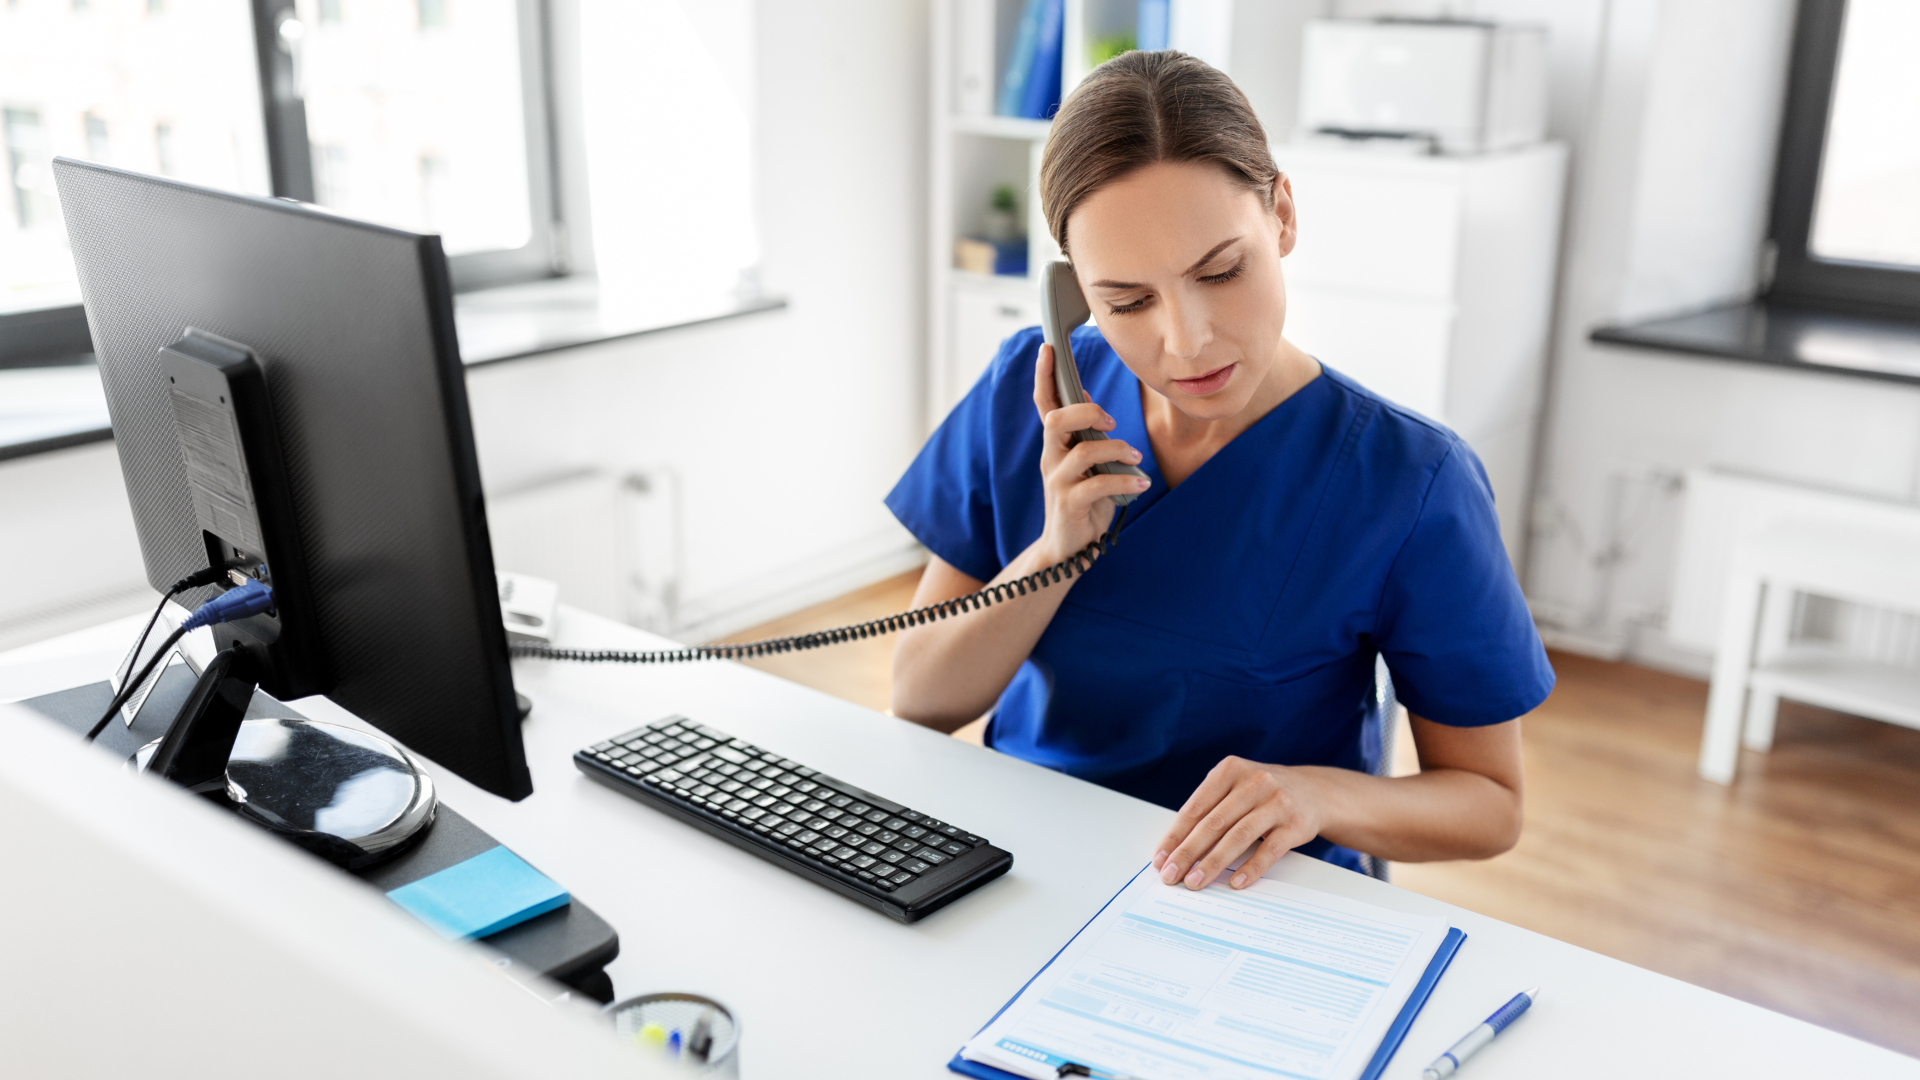 What Does a HIPAA-Compliant Phone System Mean?